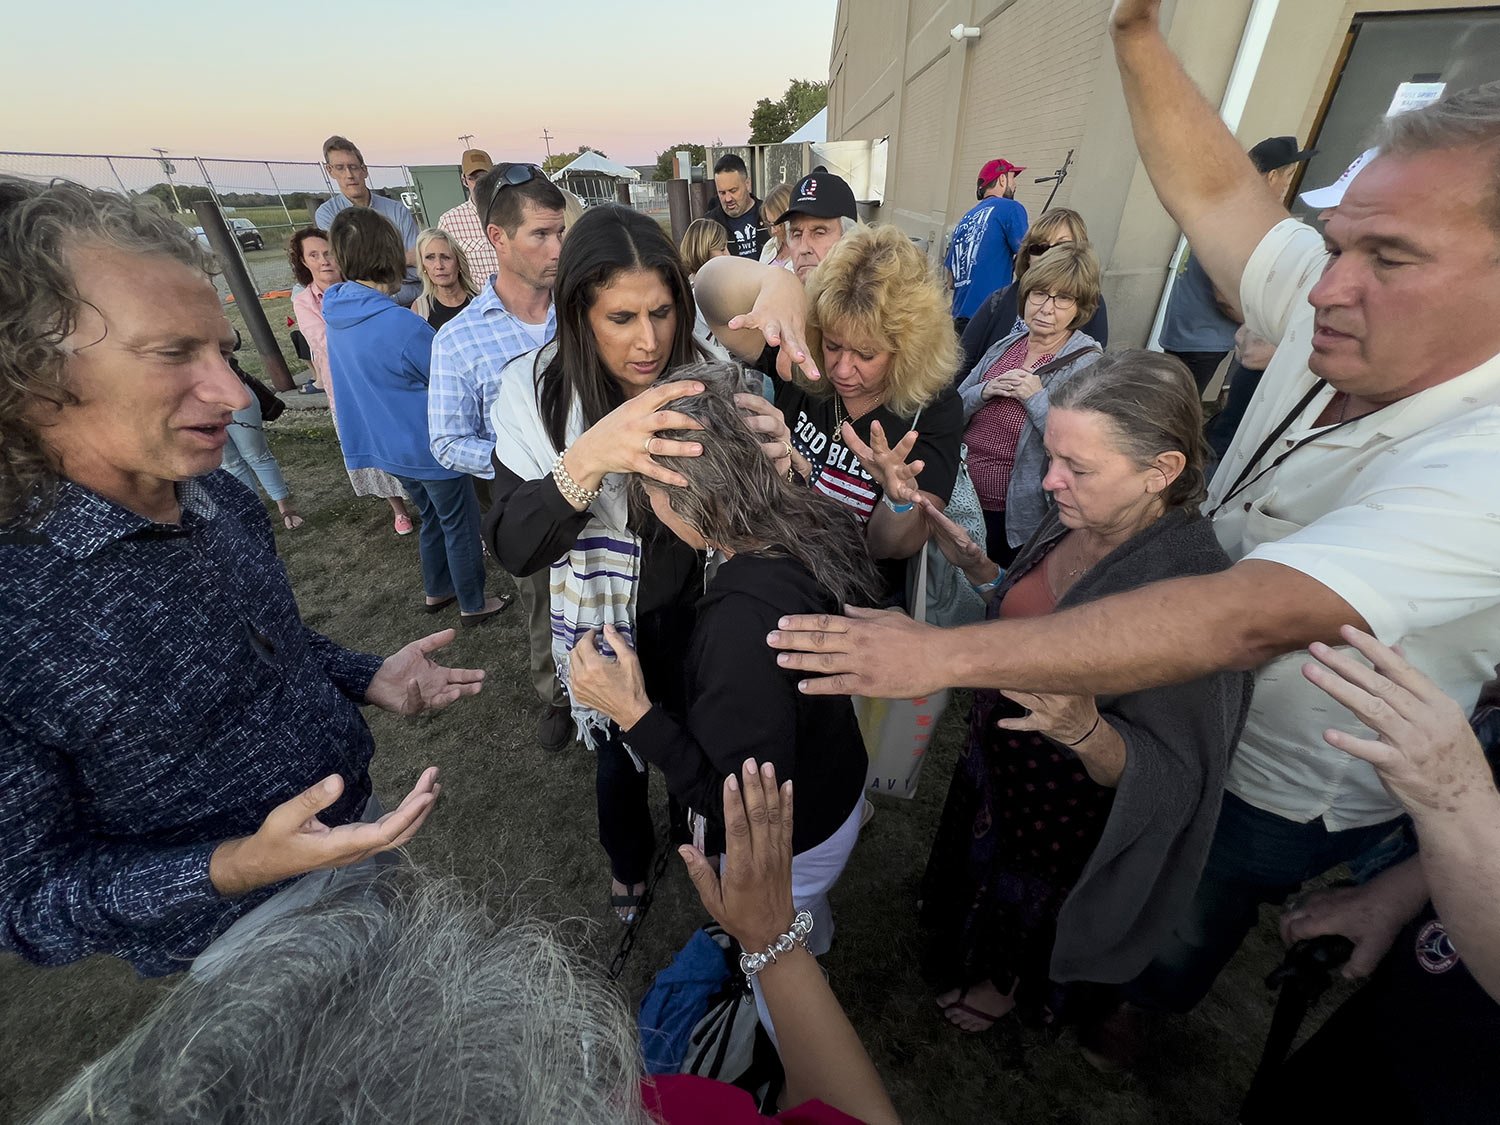  Amanda Grace of Ark of Grace Ministries and a group of people gather in prayer around a woman for the laying of hands during the ReAwaken America Tour at Cornerstone Church in Batavia, N.Y., Aug. 12, 2022. (AP Photo/Carolyn Kaster) 